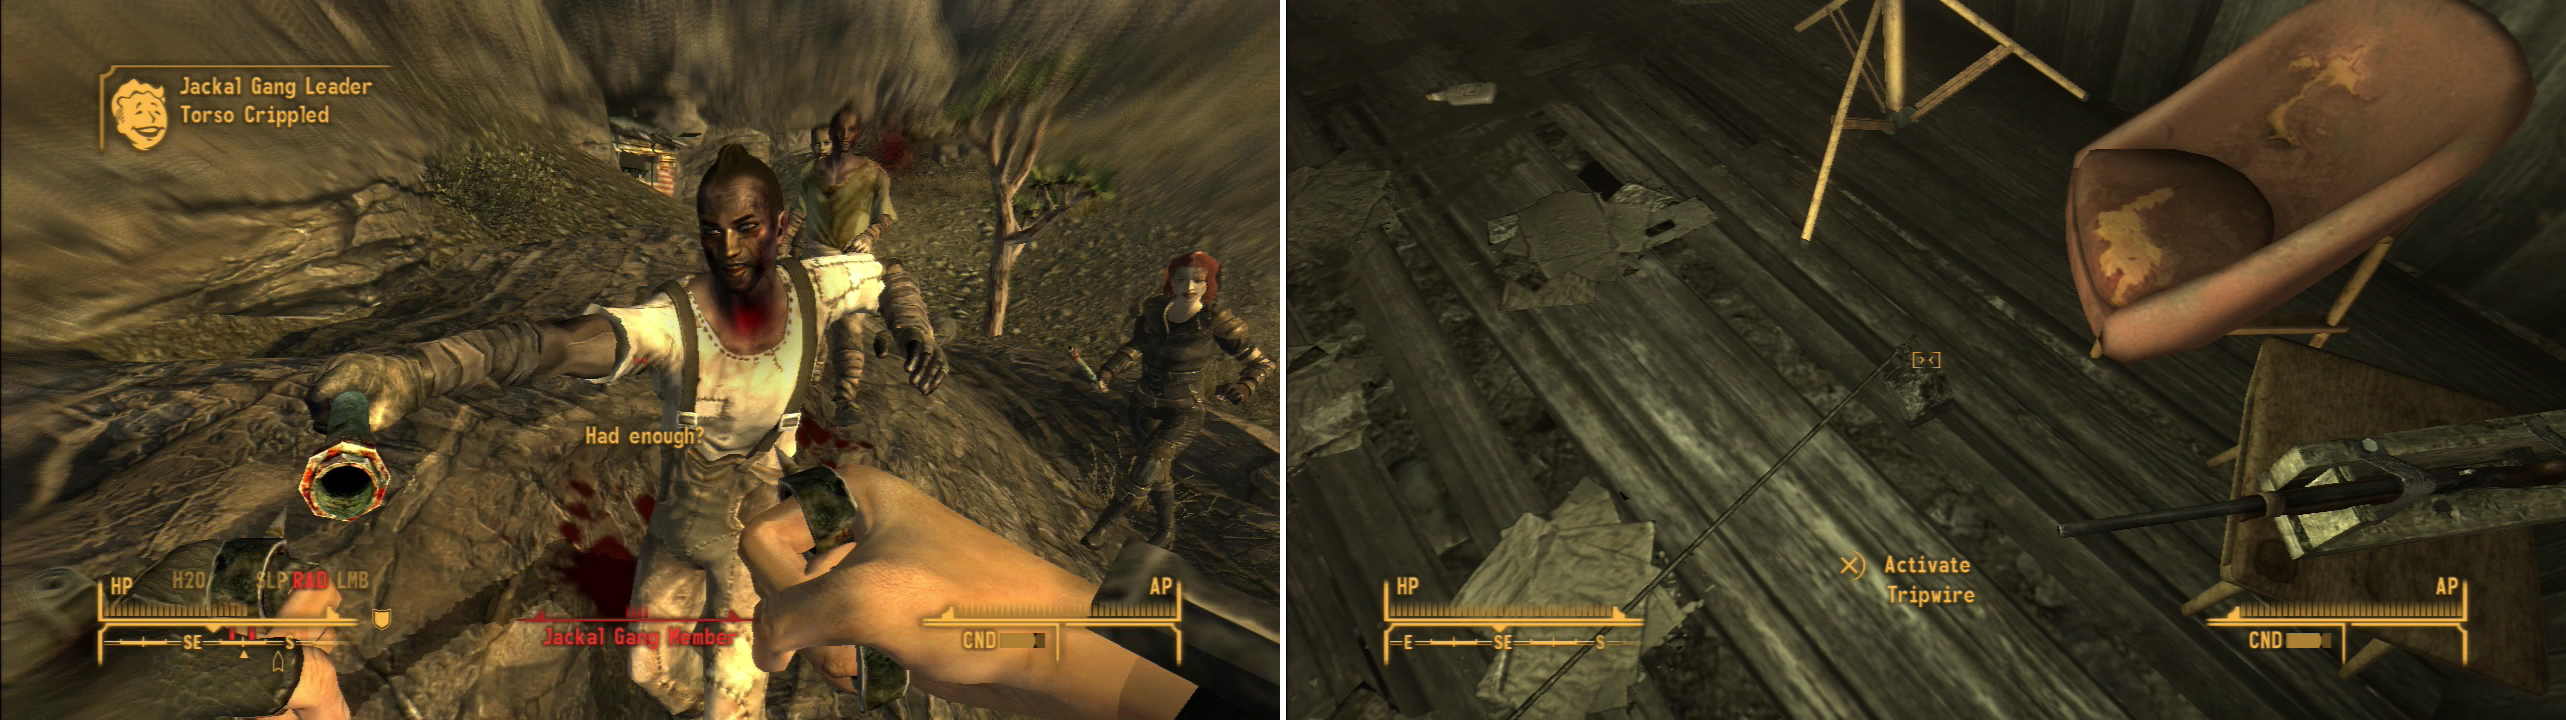 Fight the Jackal Gangers outside of Bradley’s Shack (left) then navigate your way through the traps inside (right).